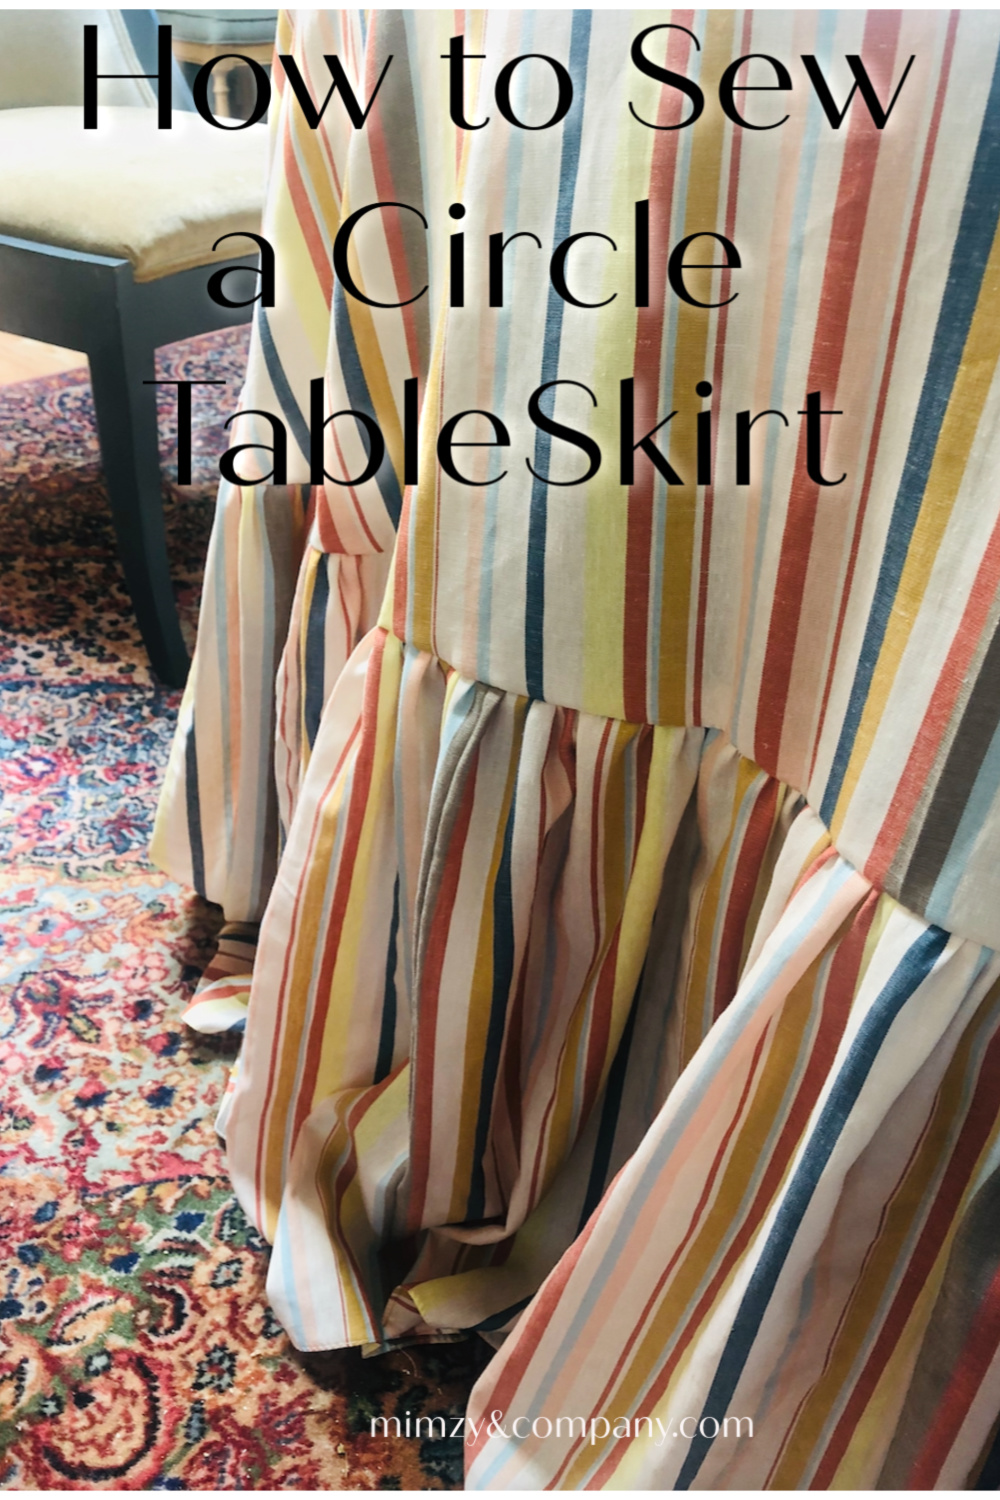 How To Sew A Circle Floor Length Table, How To Make A Circular Table Skirt